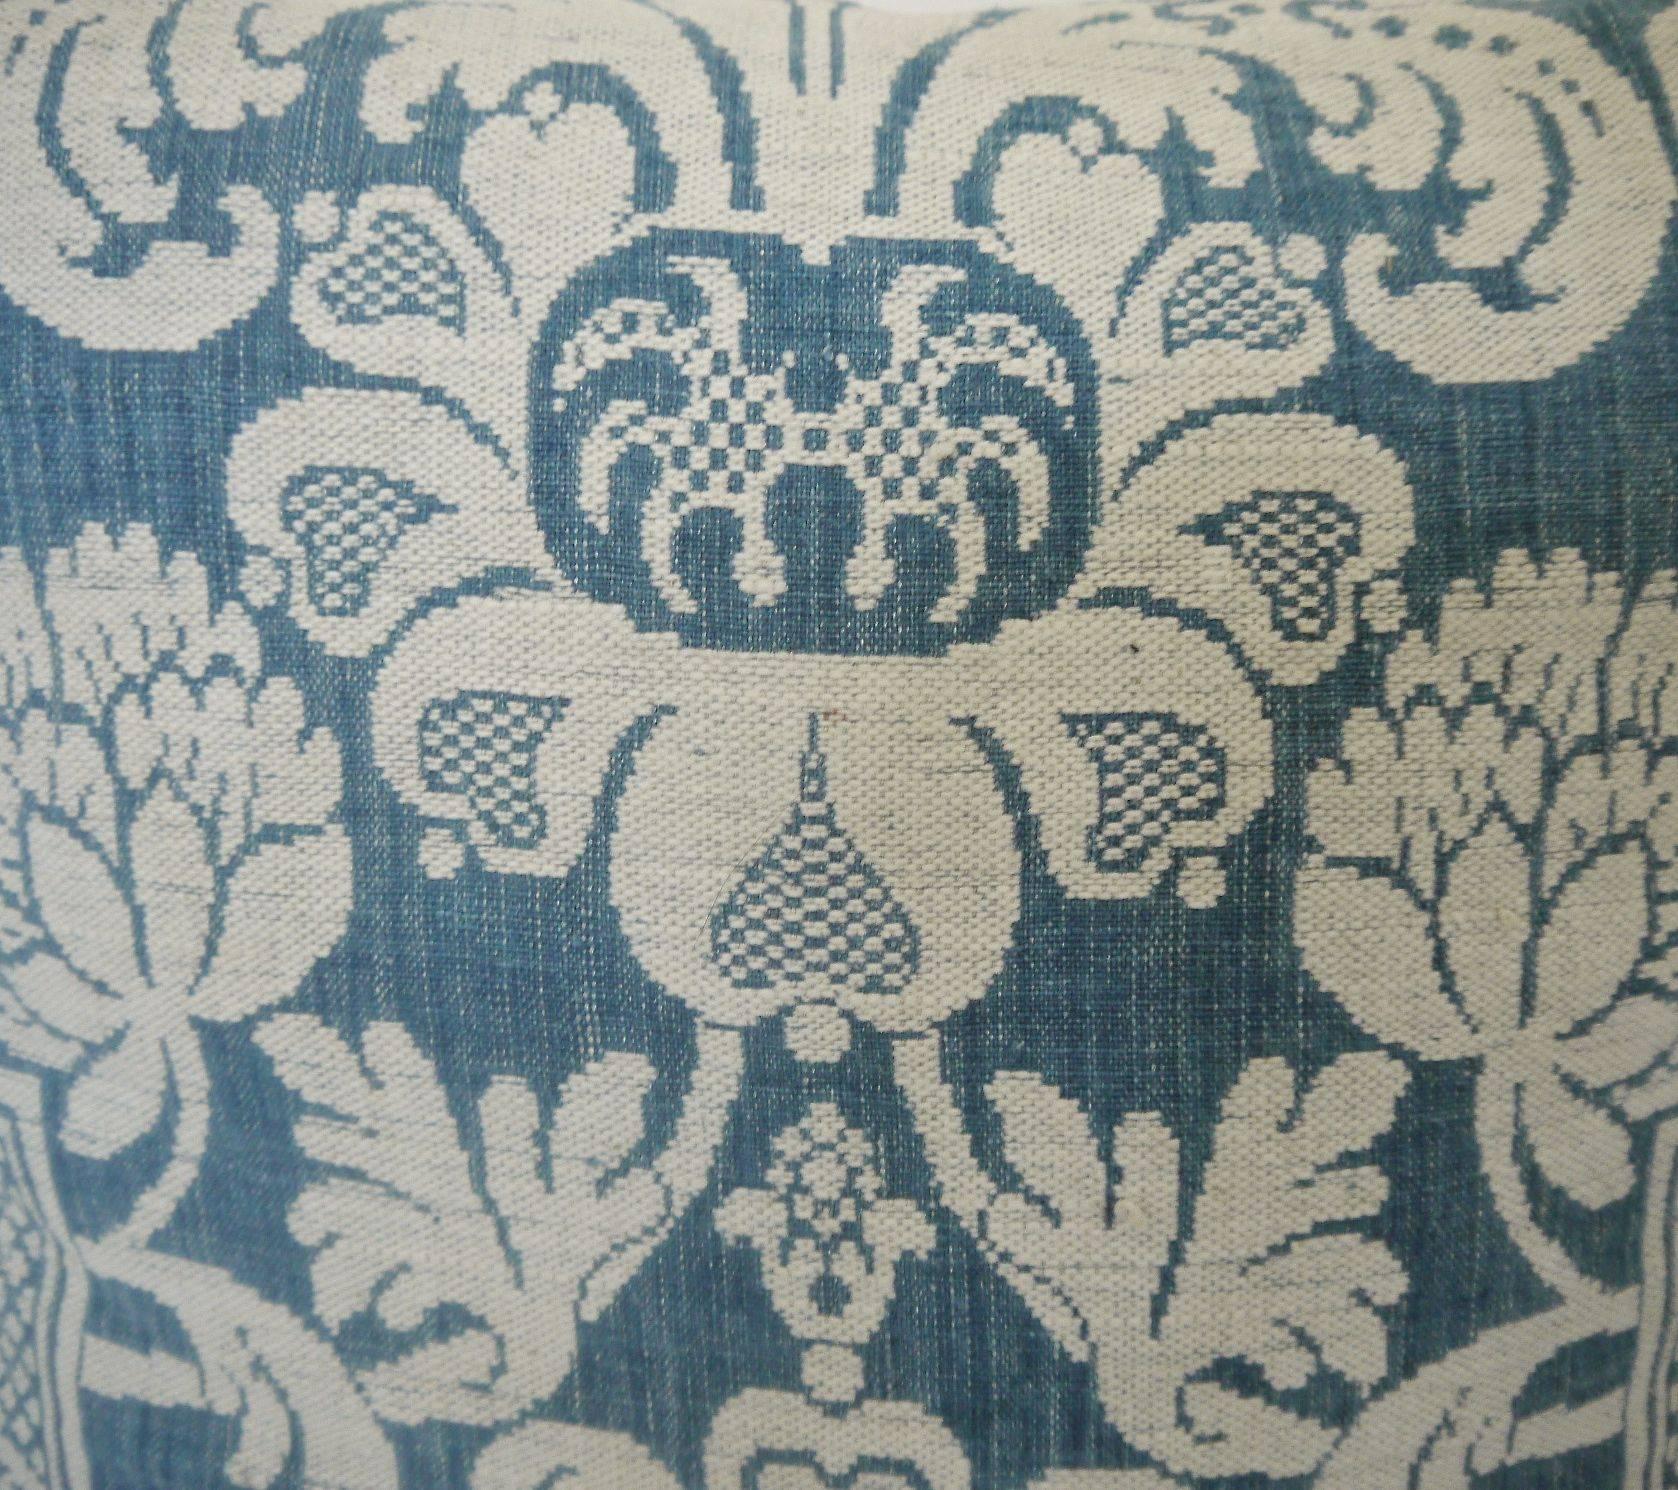 French Provincial 1760s French Antique Toile D'abbeville Woven Blue and White Linen Cotton Pillow